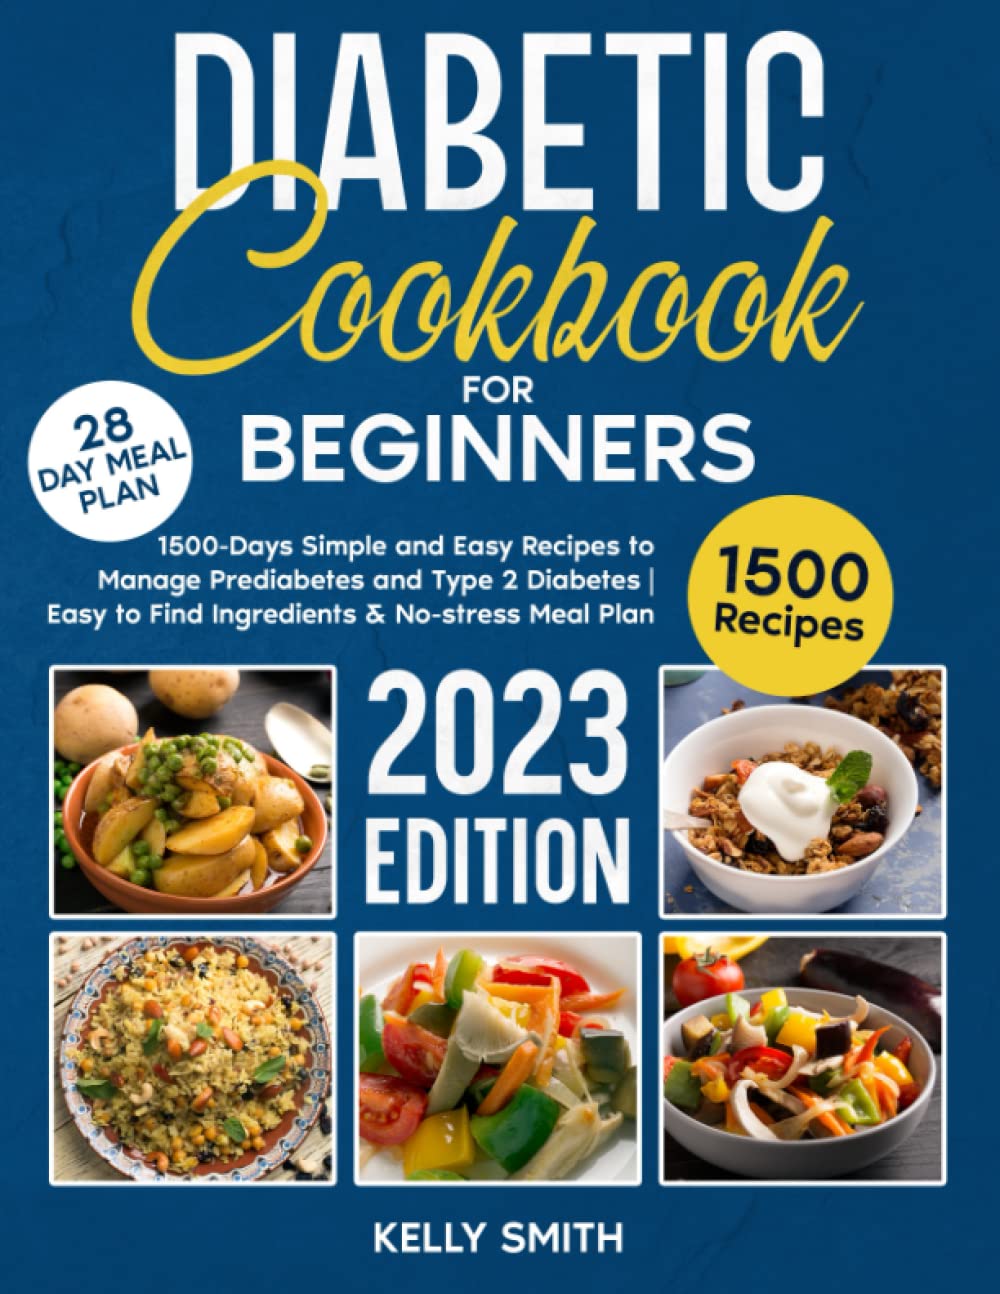 DIABETIC COOKBOOK FOR BEGINNERS: 1500-Days Simple and Easy Recipes to Manage Prediabetes and Type 2 Diabetes | Easy to Find Ingredients & No-stress Meal Plan